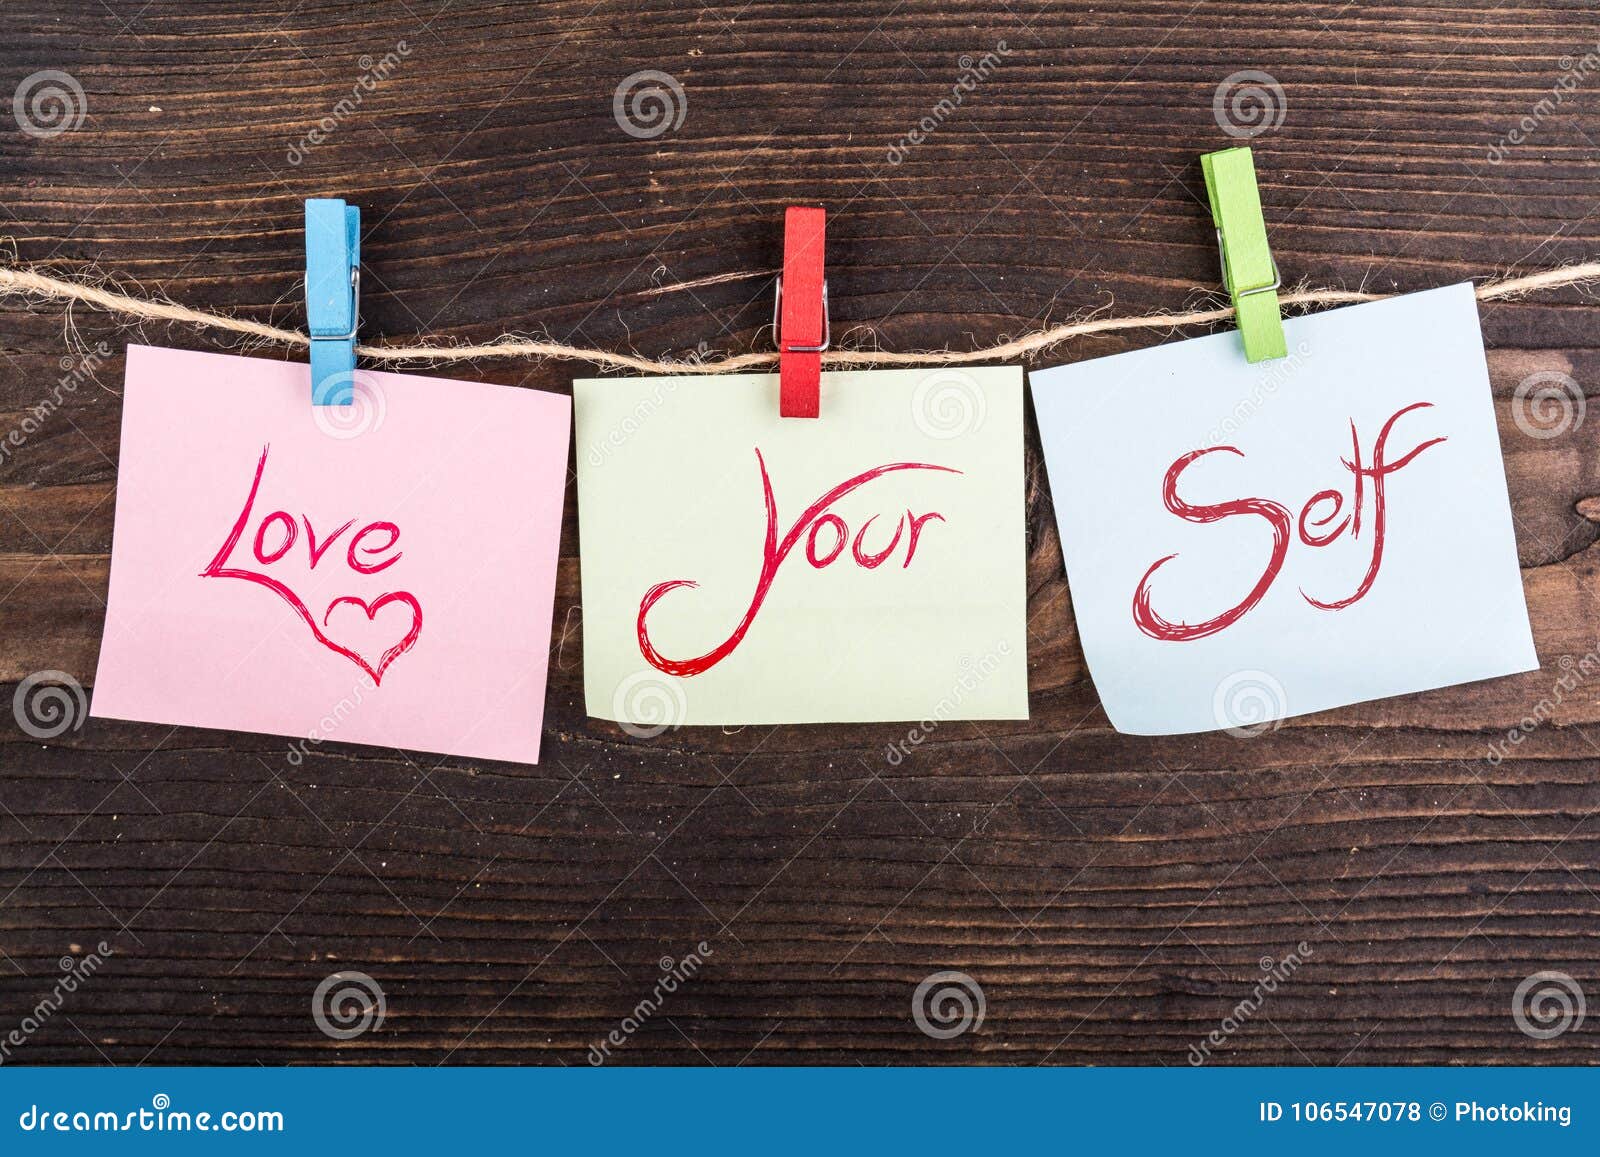 love your self note